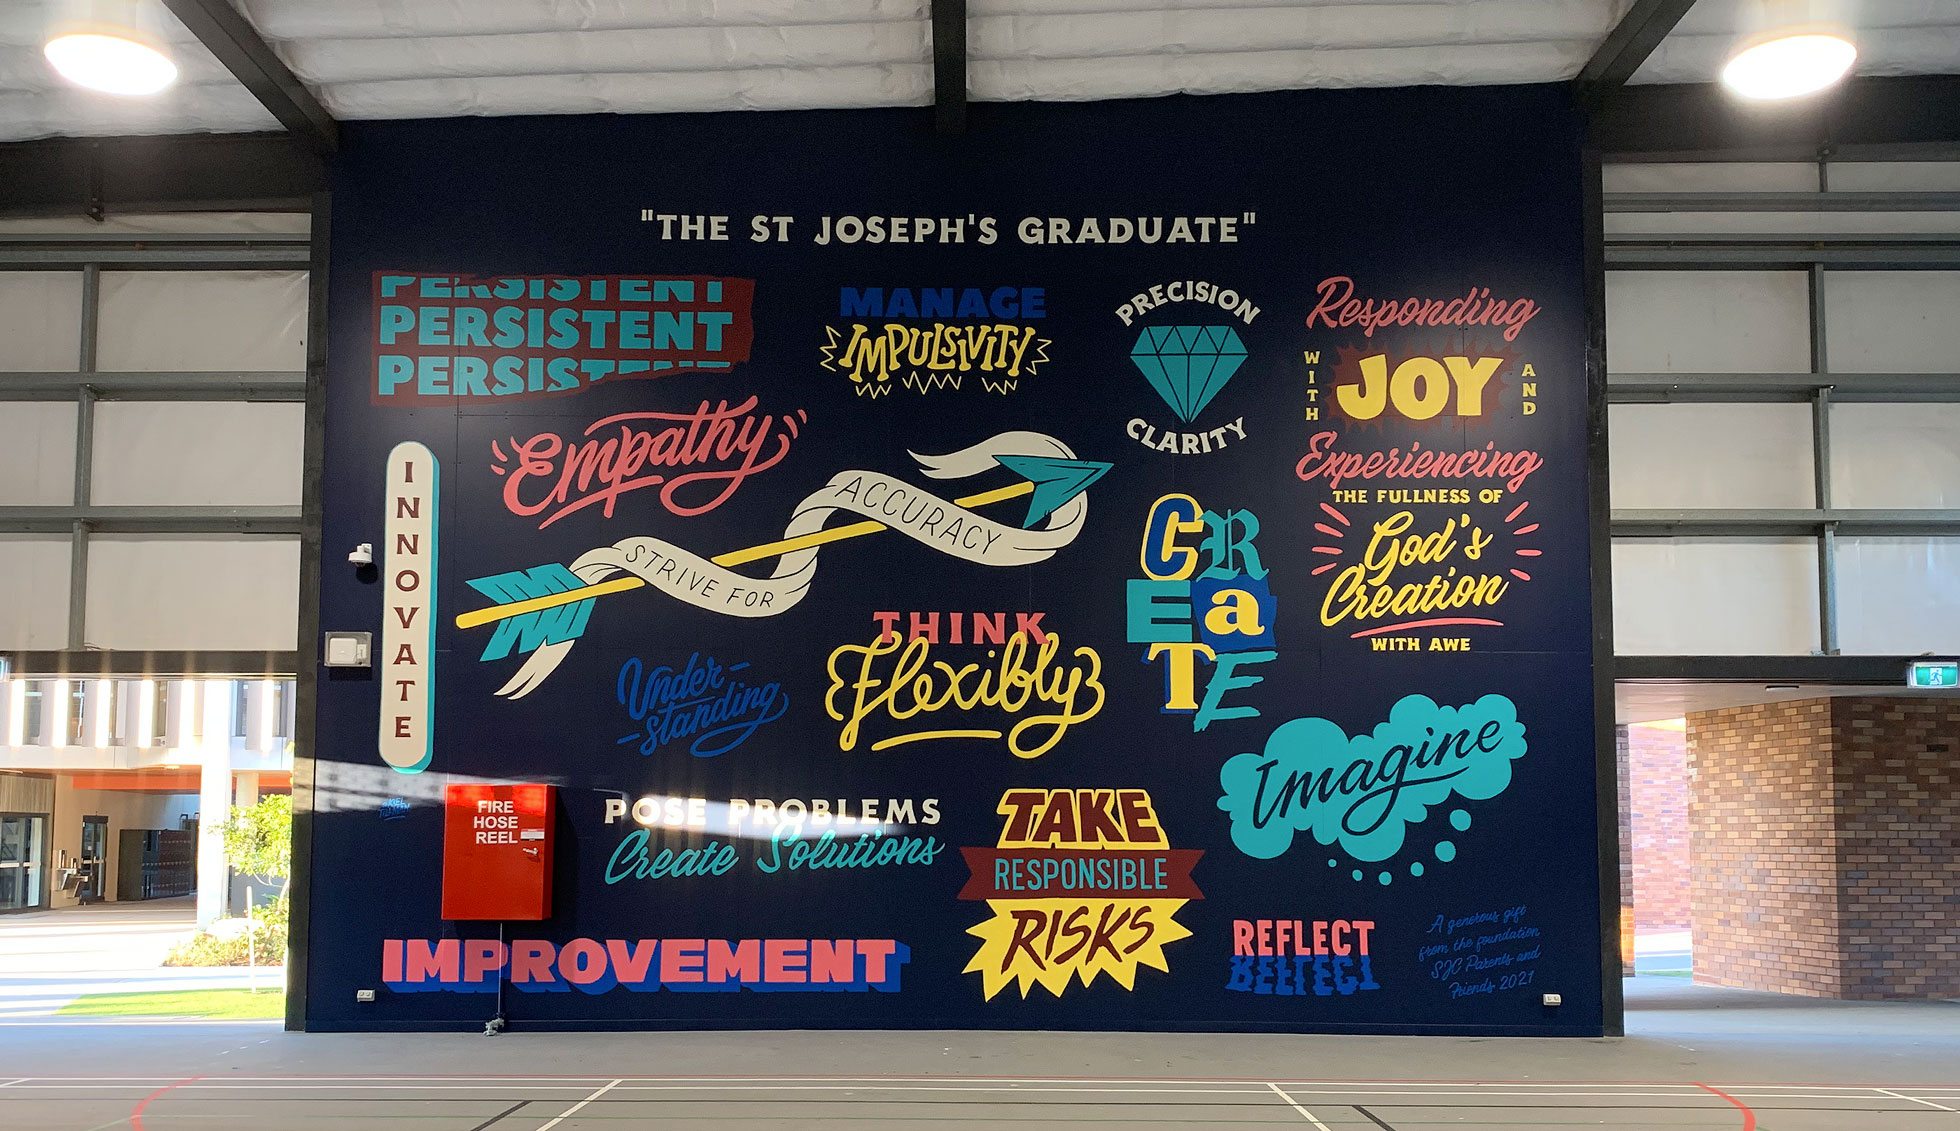 A typography-based mural featuring school values